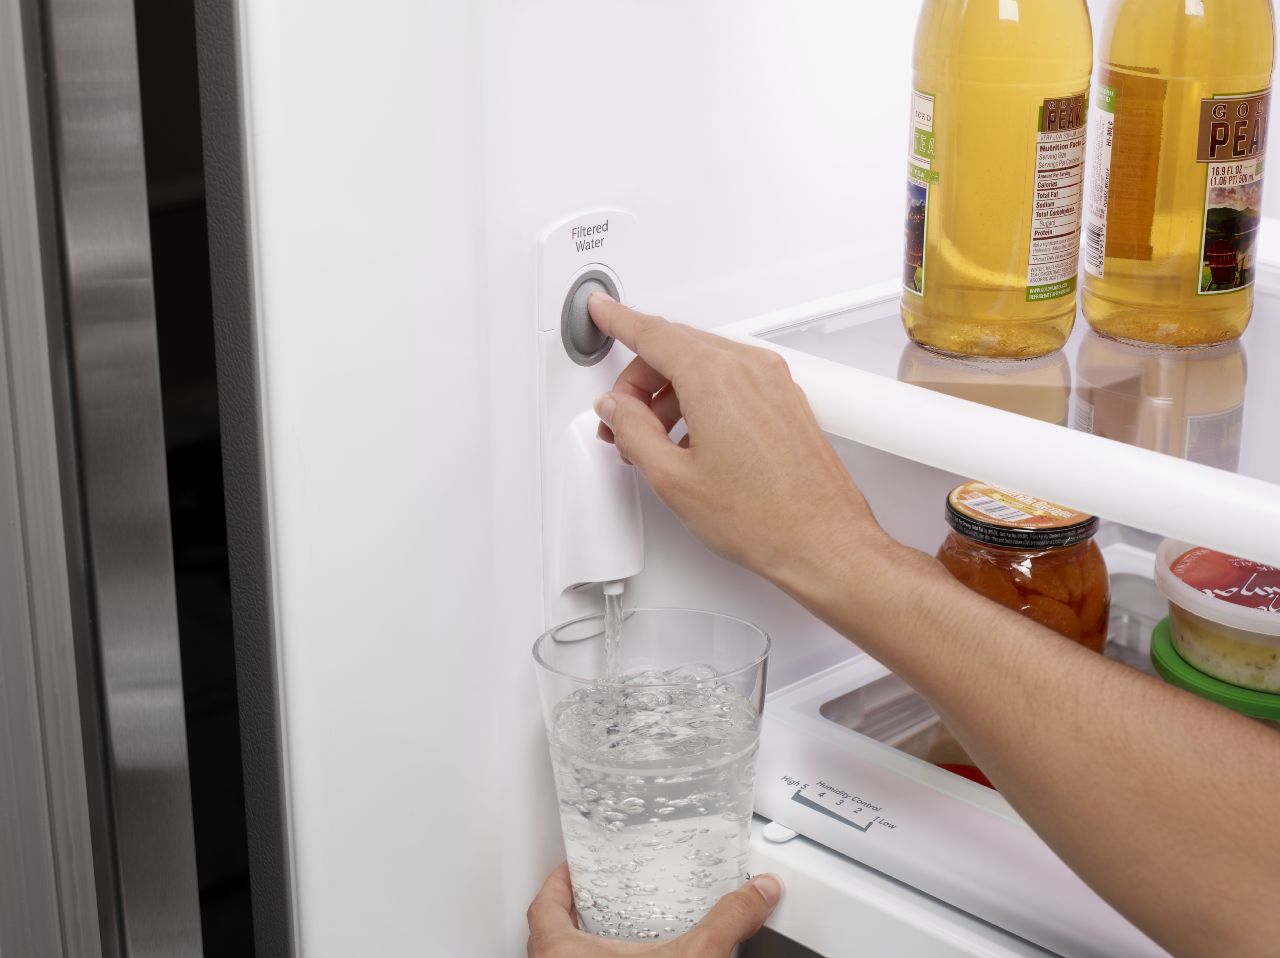 Why Does My Fridge Leak Water? 5 Reasons Why And Easy DIY Fixes